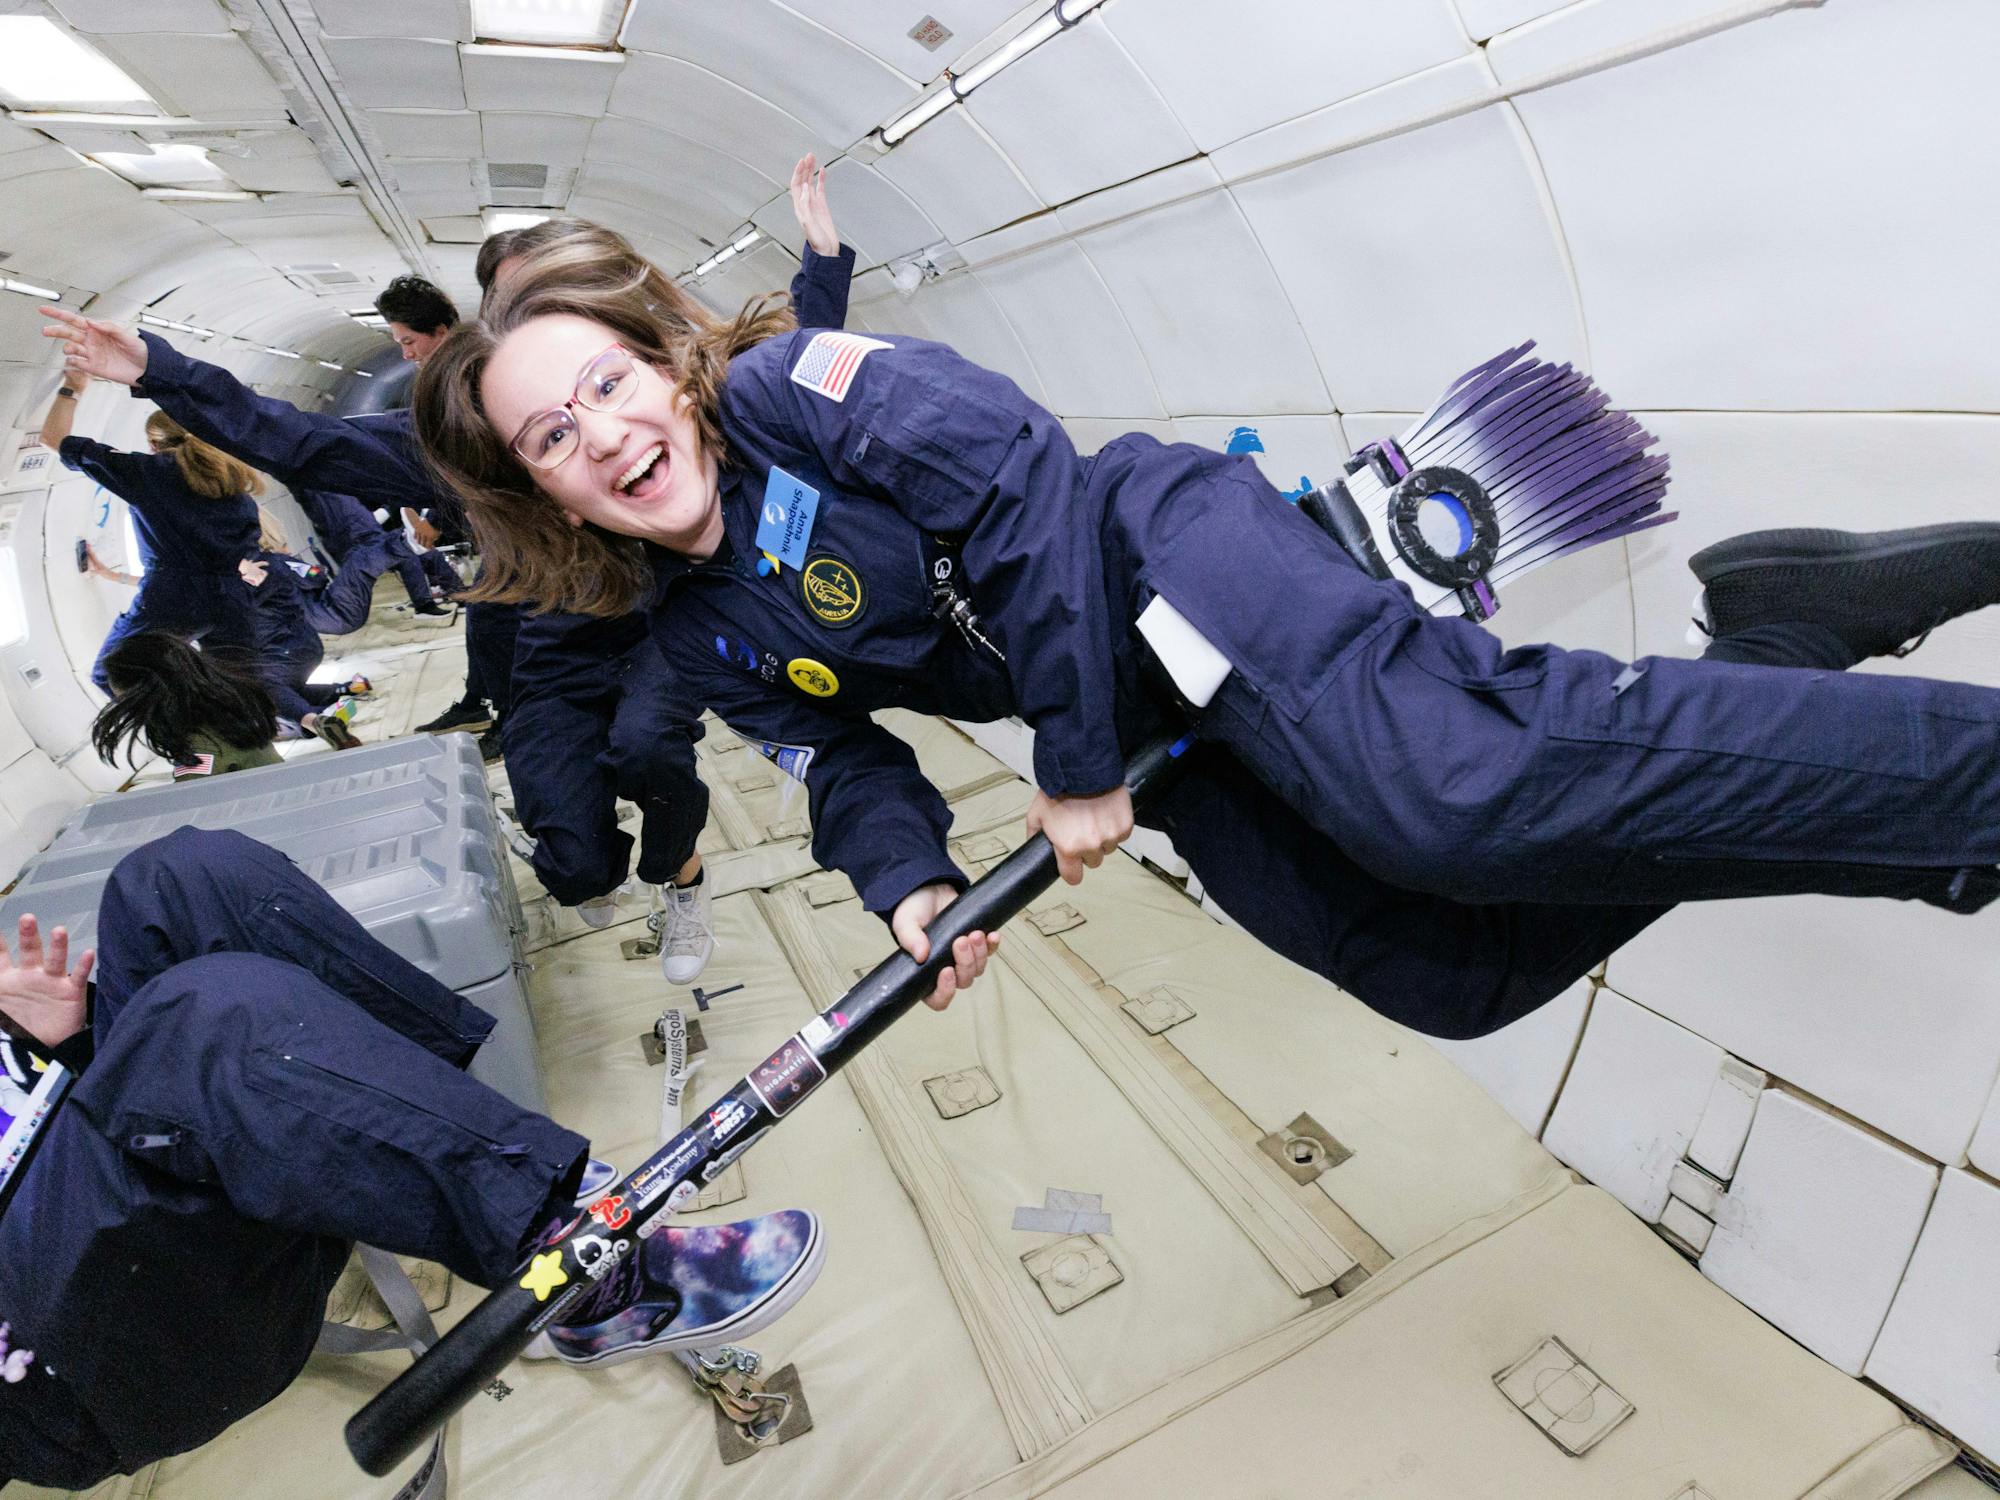 A young woman floats in zero gravity in a flight suit, holding a broomstick